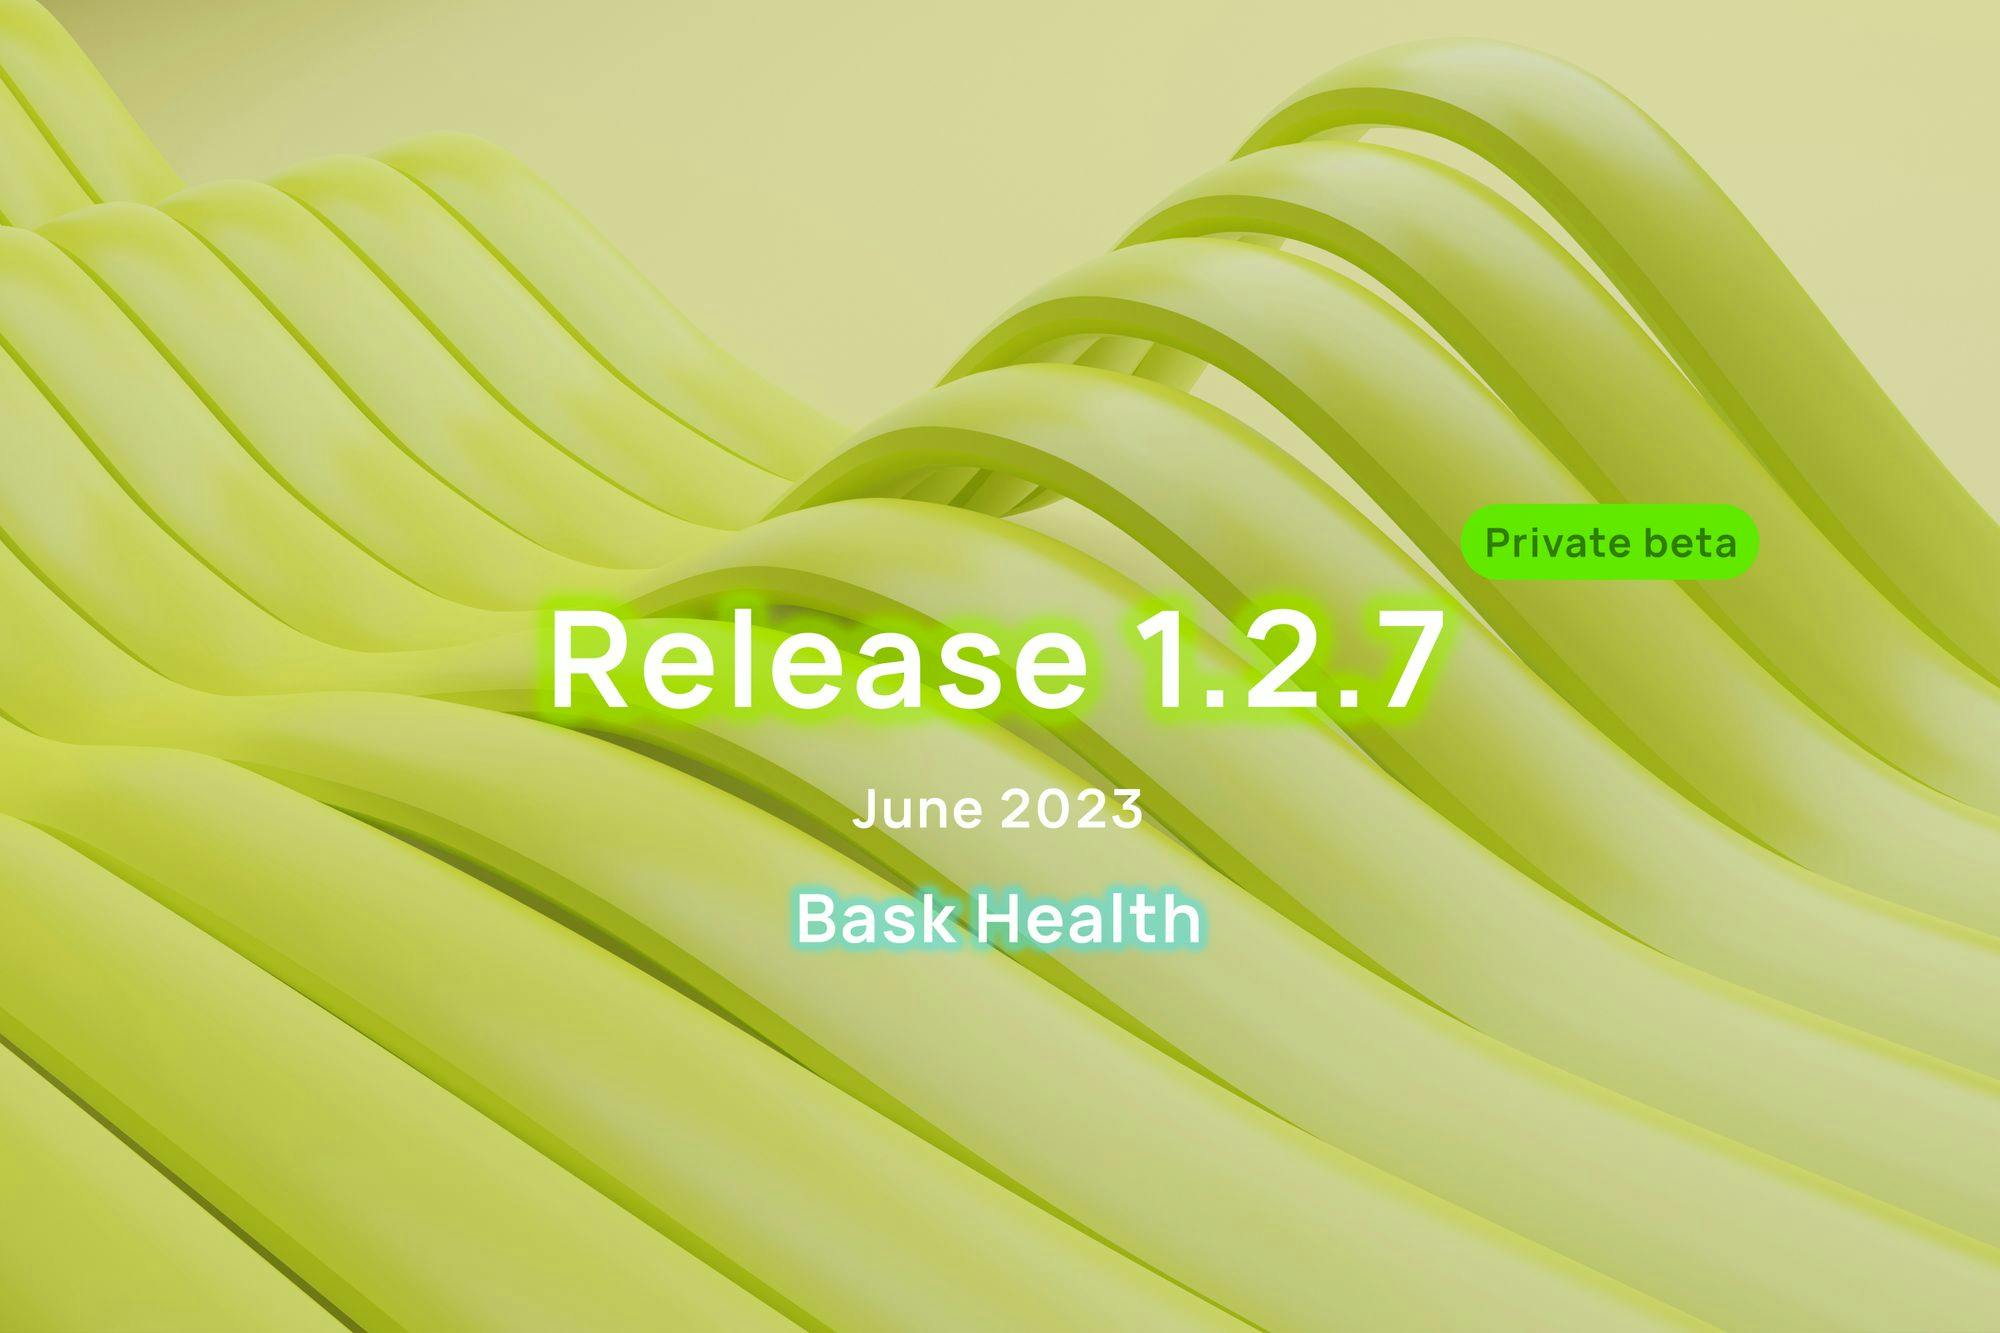 Release 1.2.7